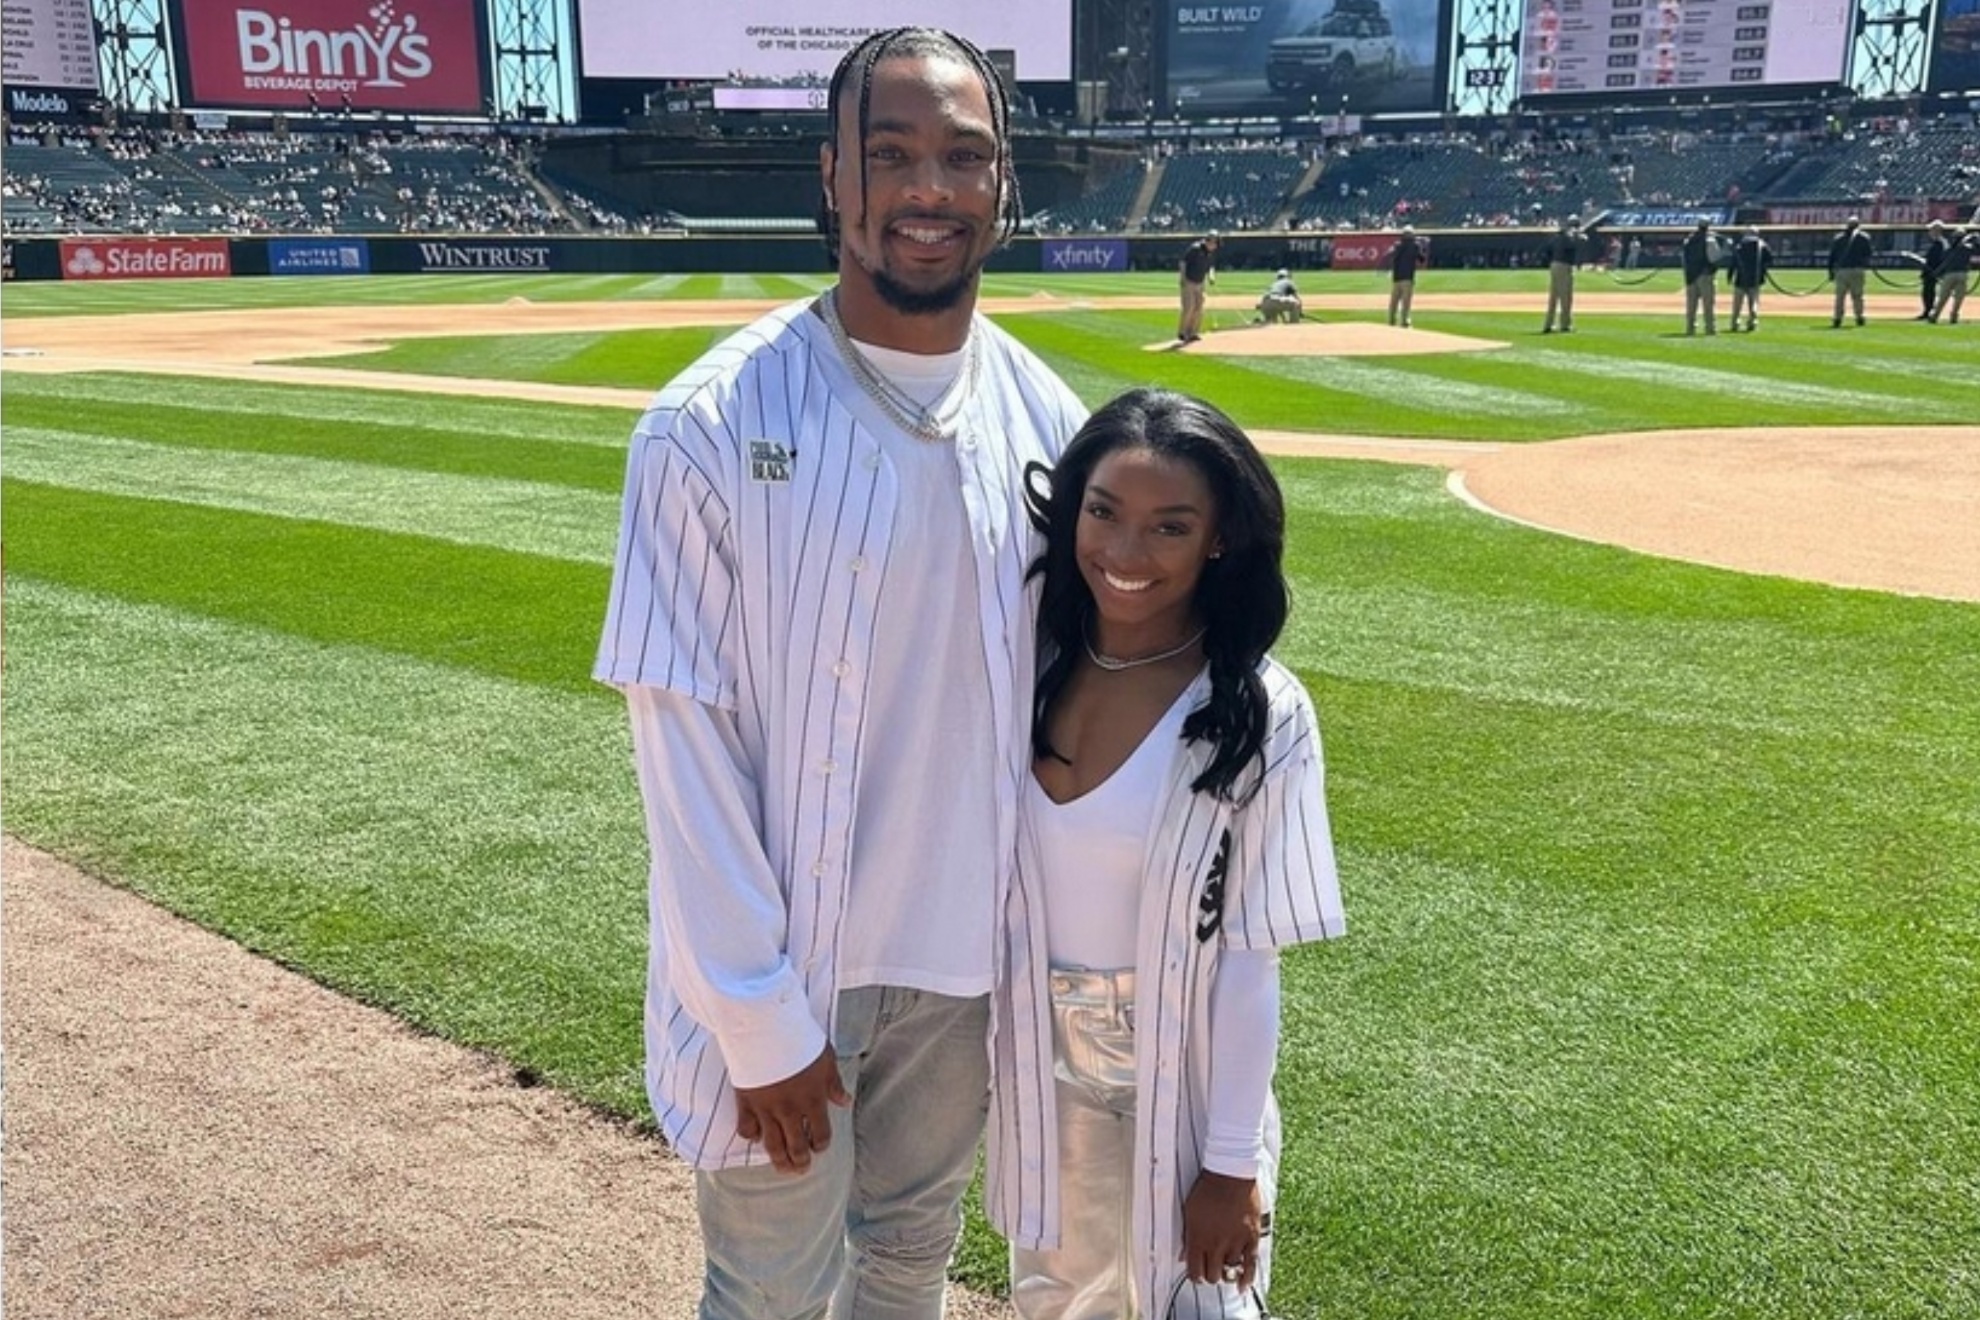 Jonathan Owens and Simone Biles at the Guaranteed Rate Field for the White Soxs game.